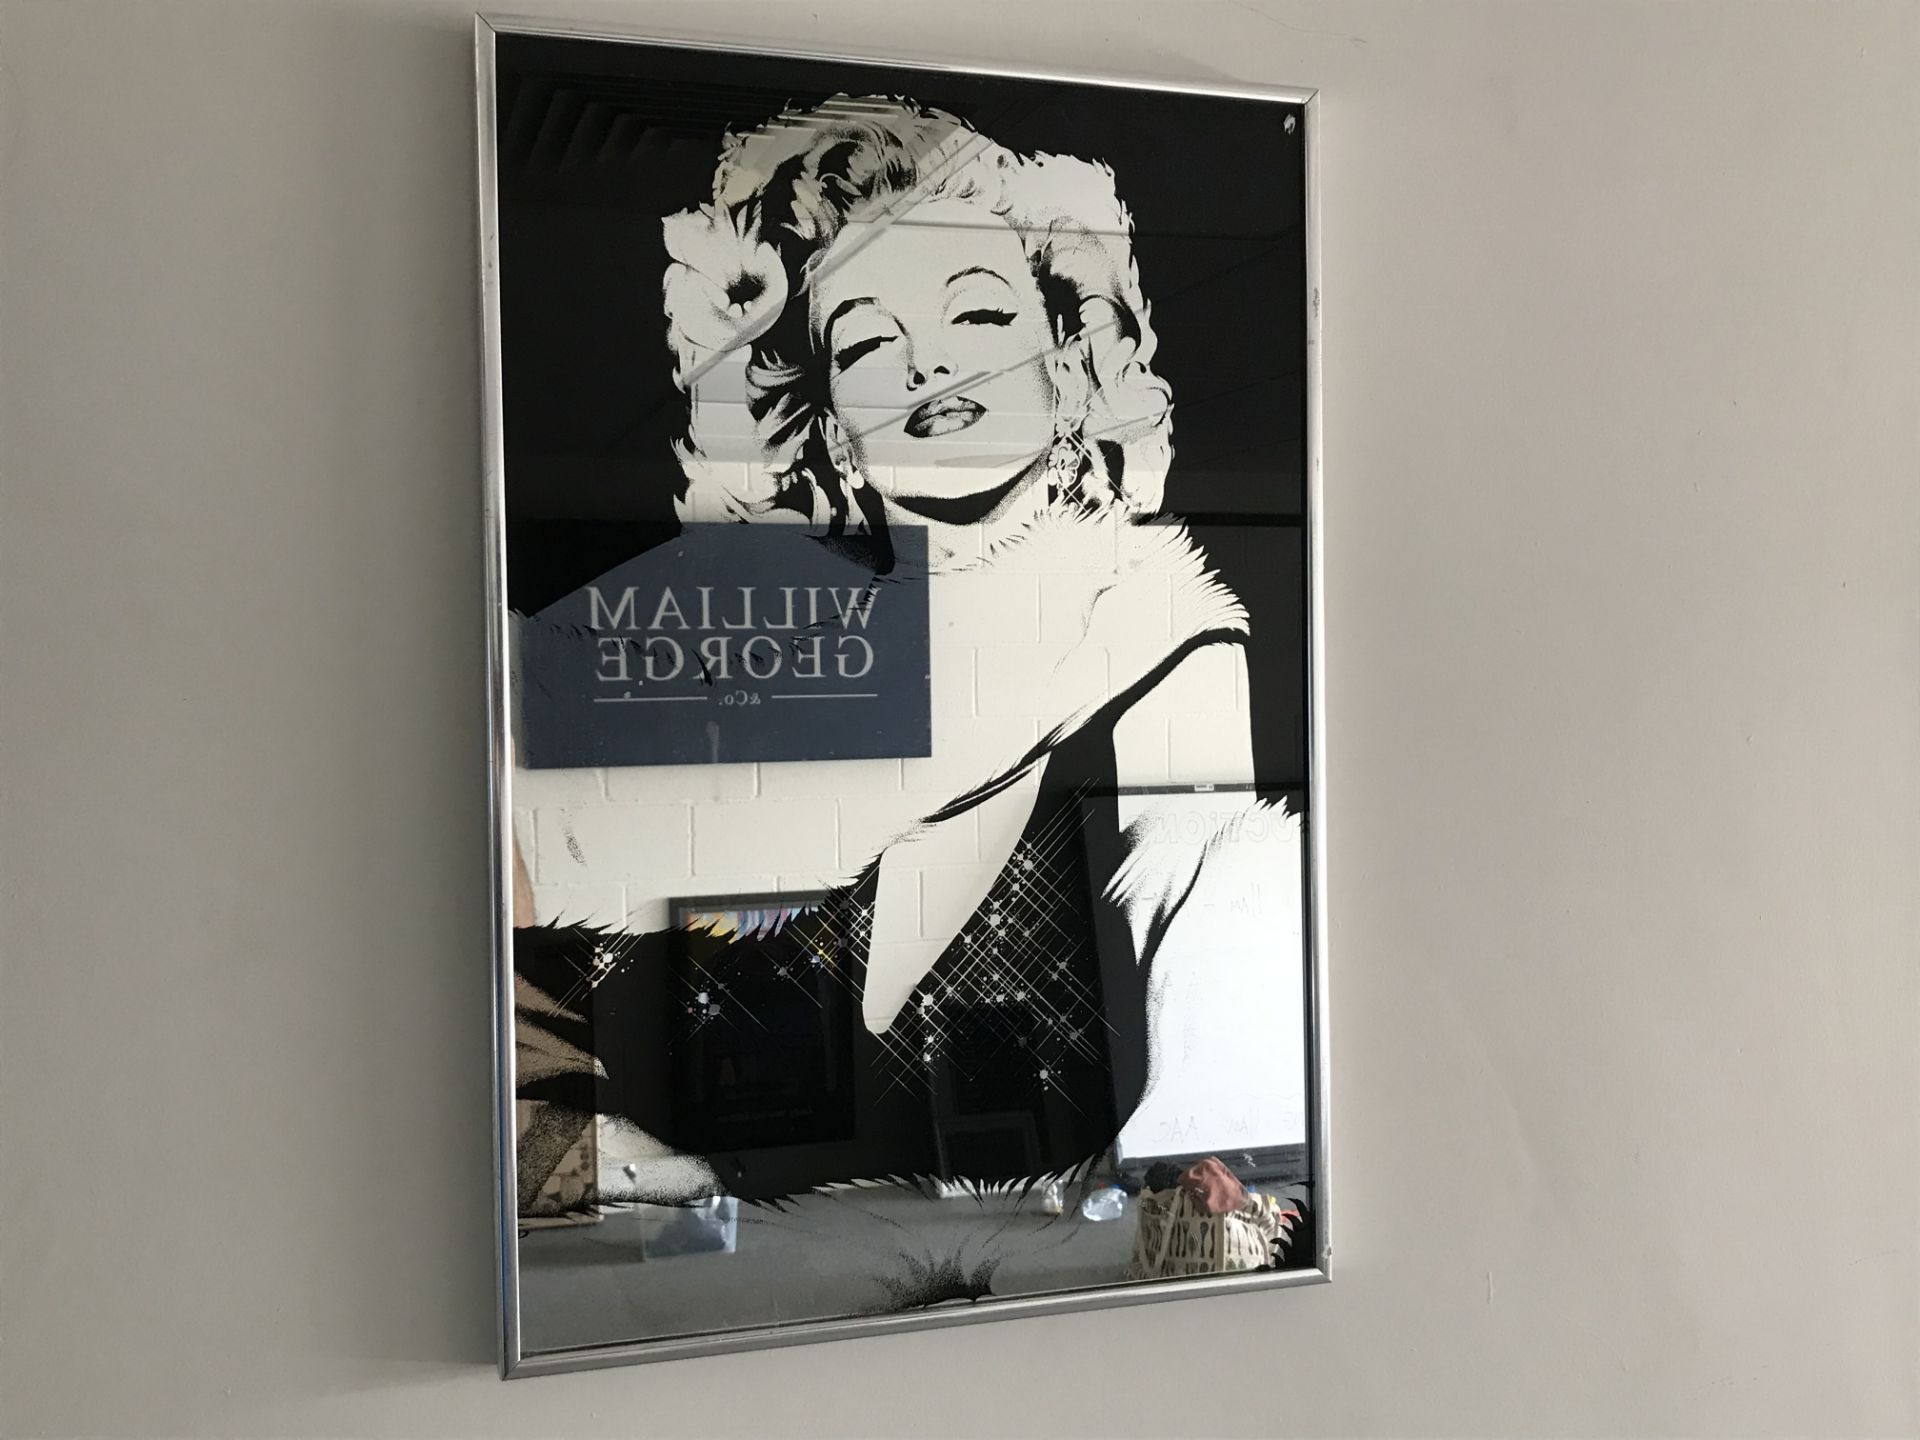 Collection of Images and Prints - John Lennon and Marilyn Monroe - Image 5 of 9